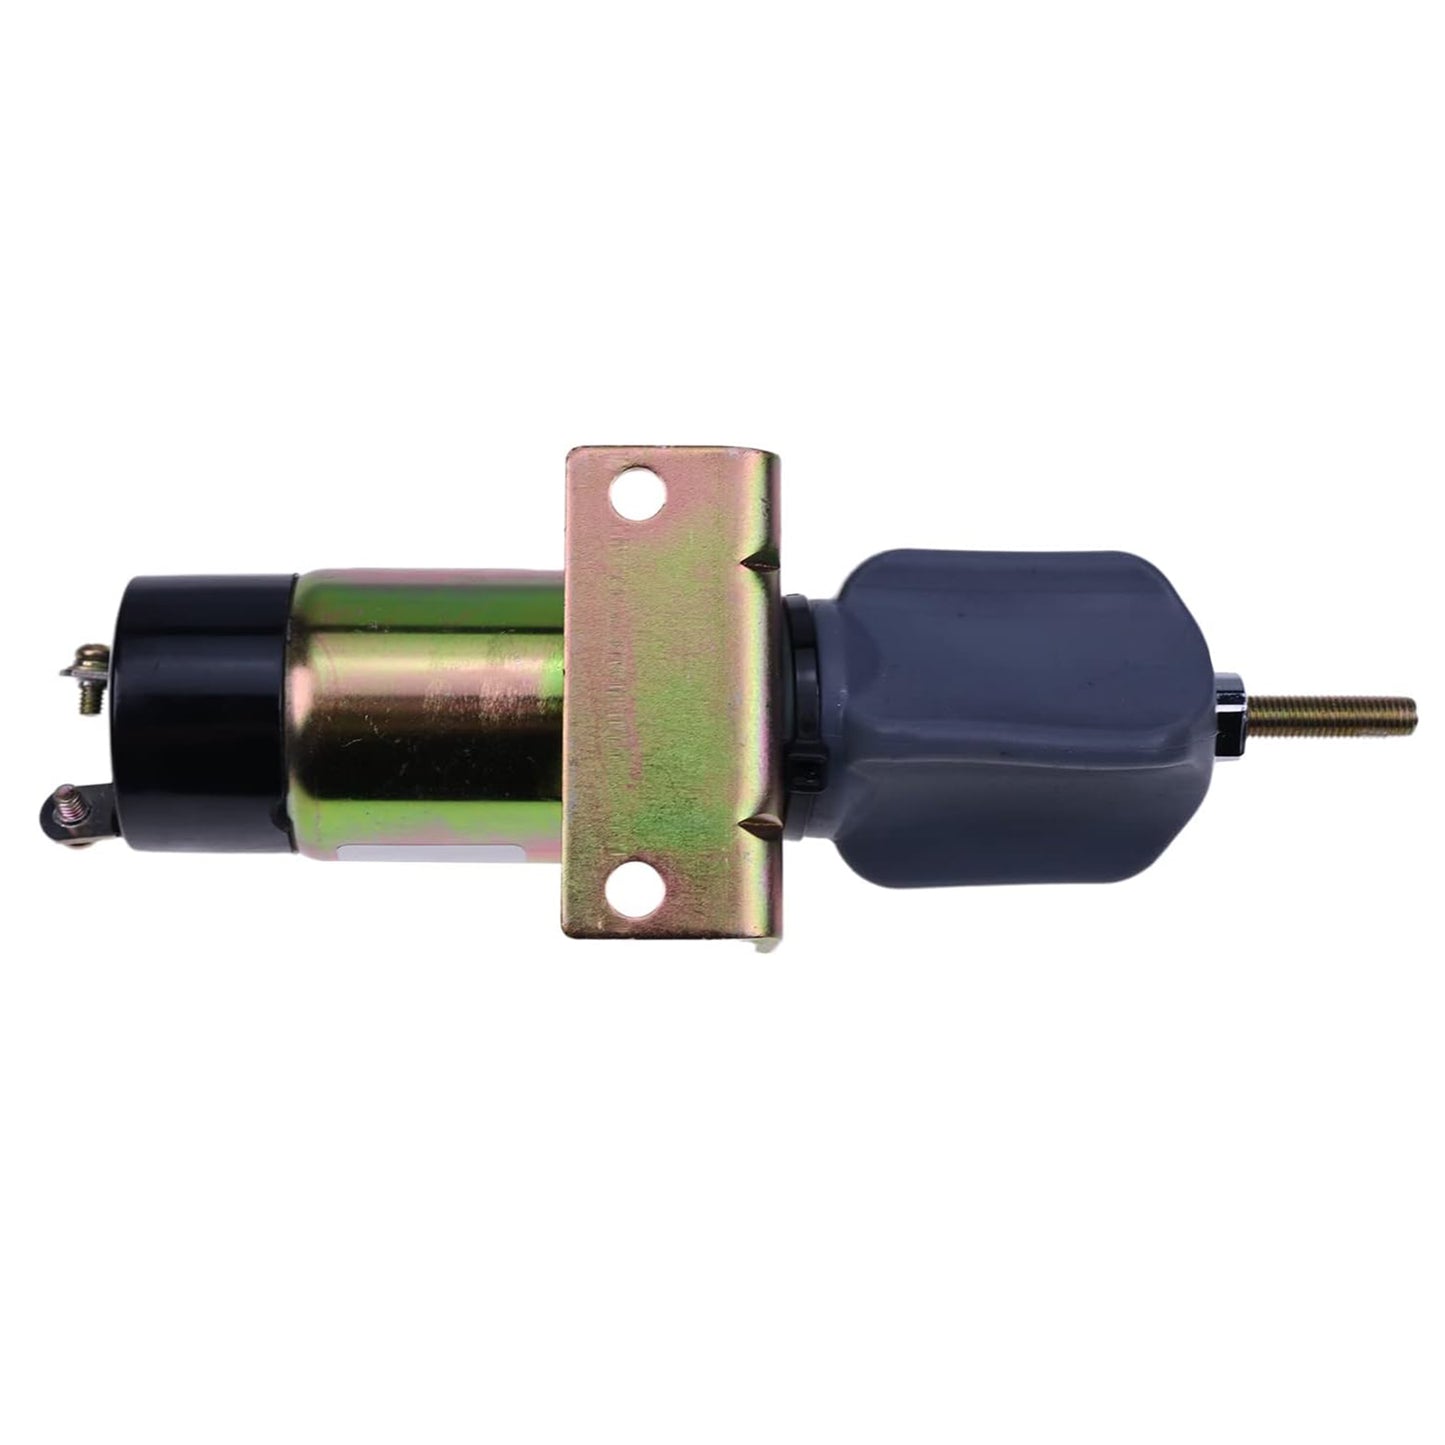 1502-12C2U1B1S1 Diesel Stop Solenoid 12V 12T Compatible with Woodward 1500 Series